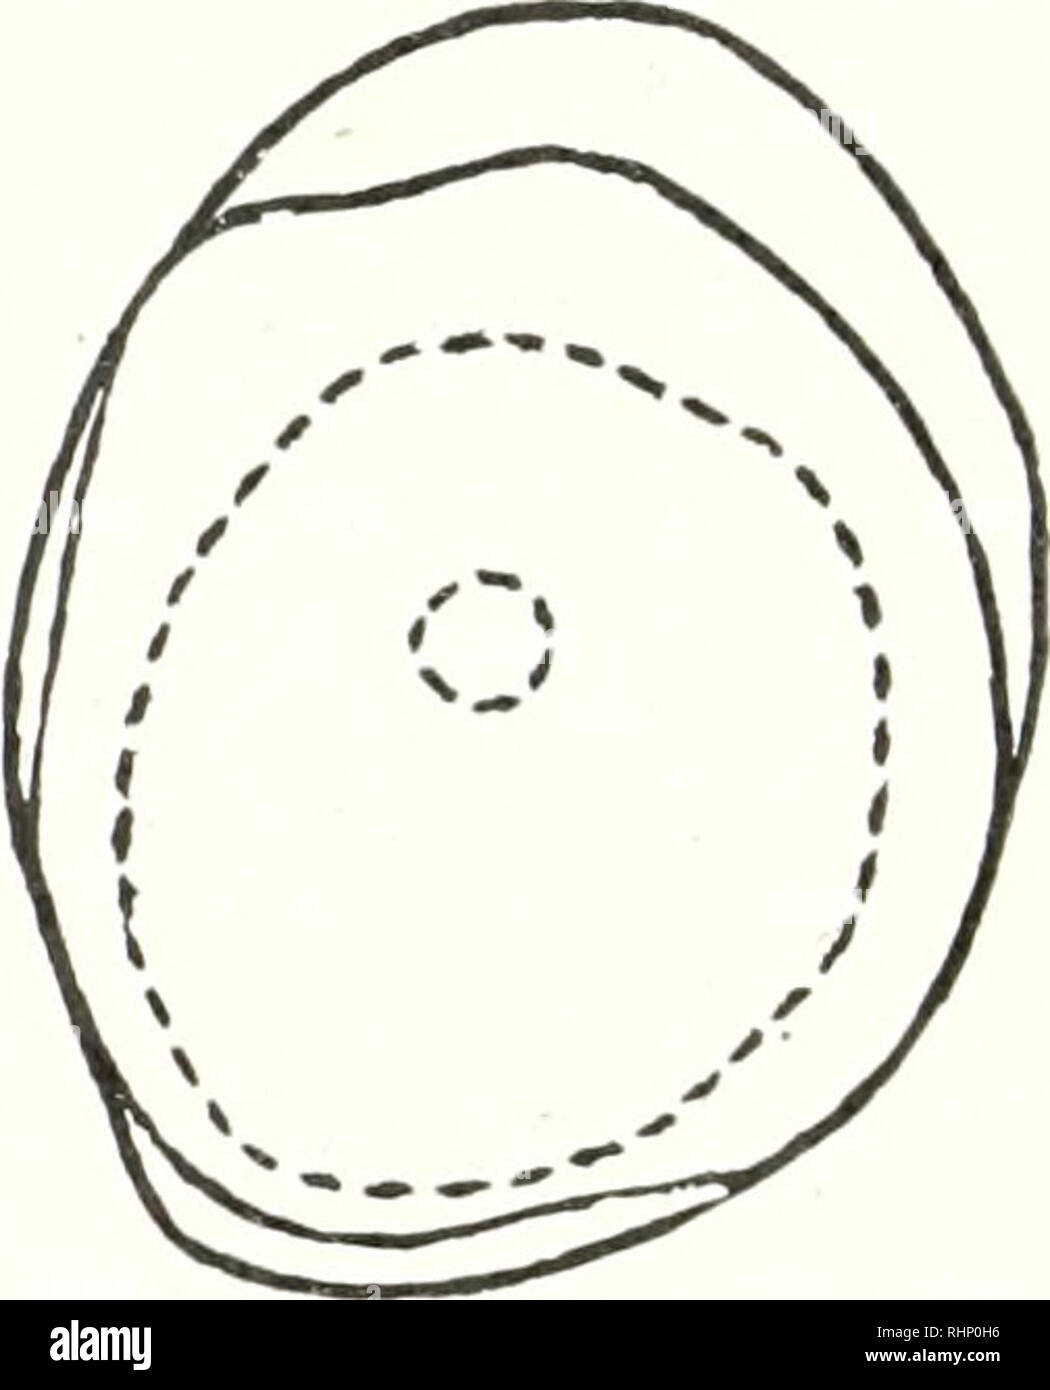 . The Biological bulletin. Biology; Zoology; Biology; Marine Biology. FIGURE 5. Two camera lucida drawings of dividing Astriclypens eggs as seen along the spindle axis. In the left hand one, the furrow is formed only at the animal pole while in the right hand one, the furrow has gone around the cell. The large dotted circles are optical sec- tions of the still uncleaved parts and the smaller dotted circles are cross-sections of the spindle. number of the protoplasmic processes which are formed just at the flattened edges of the furrow sides is greatly reduced so that the chance of their meetin Stock Photo